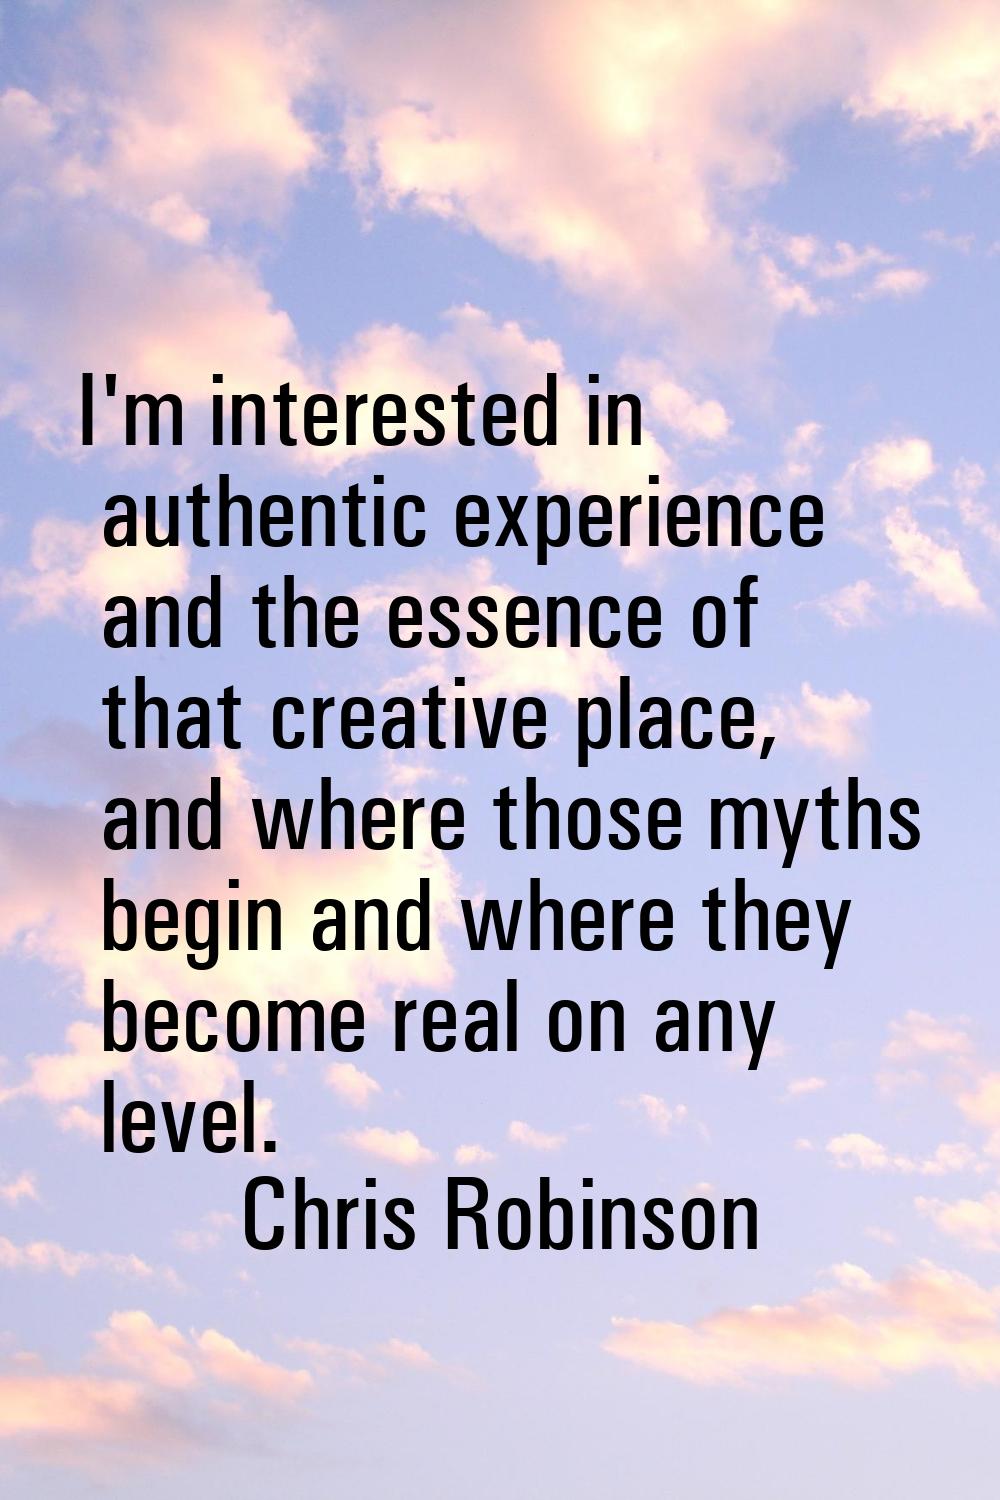 I'm interested in authentic experience and the essence of that creative place, and where those myth